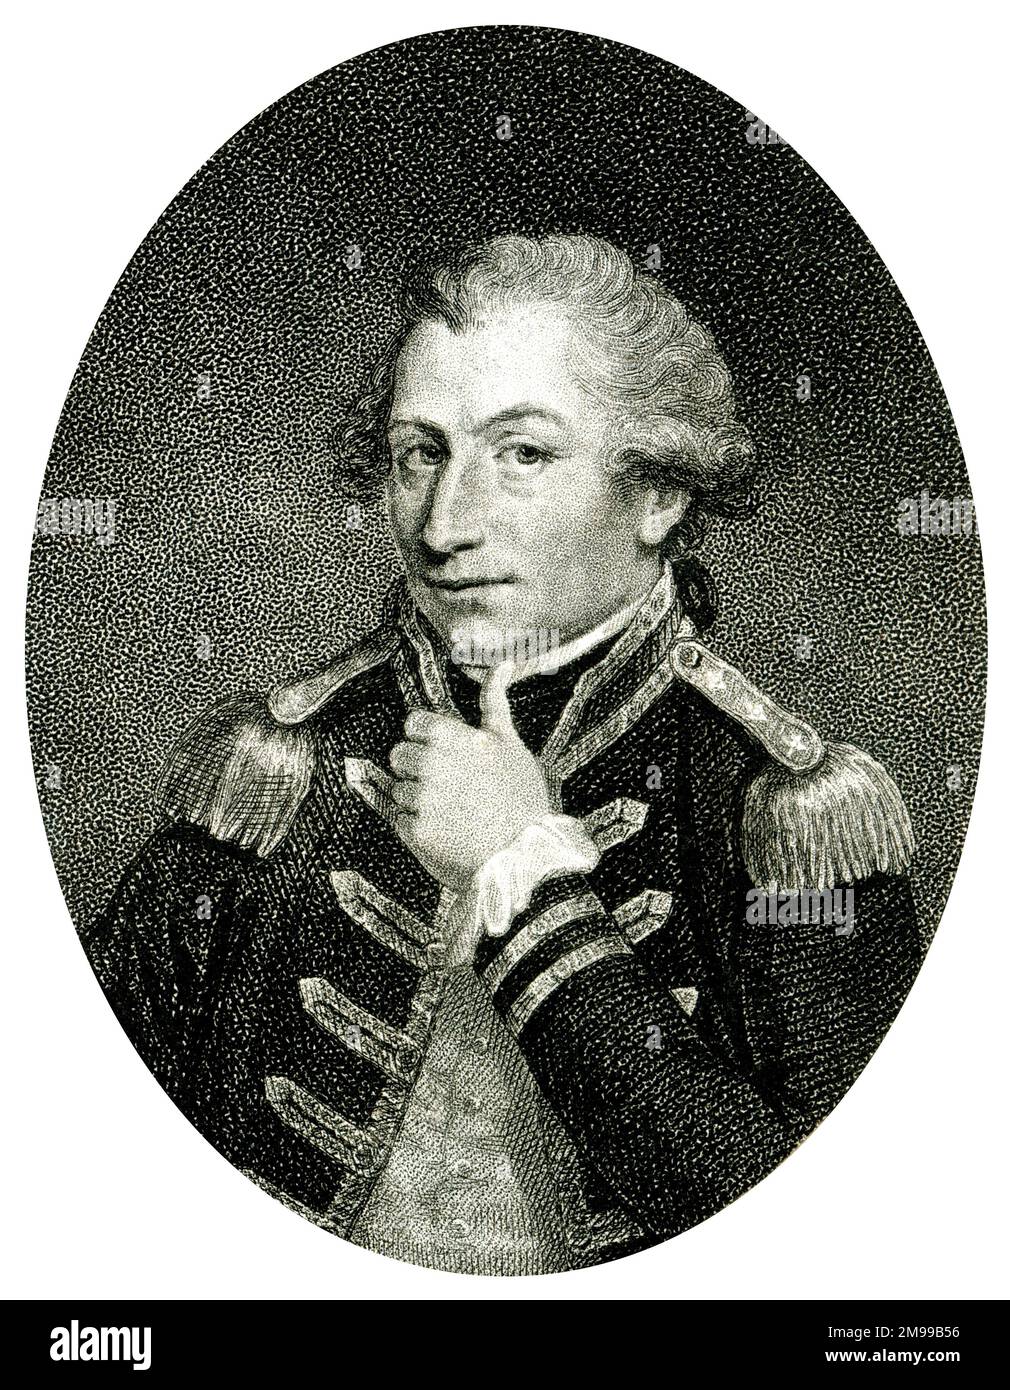 Admiral John Jervis, 1st Earl of St Vincent (1735-1823), British Royal Navy officer and Member of Parliament. Stock Photo